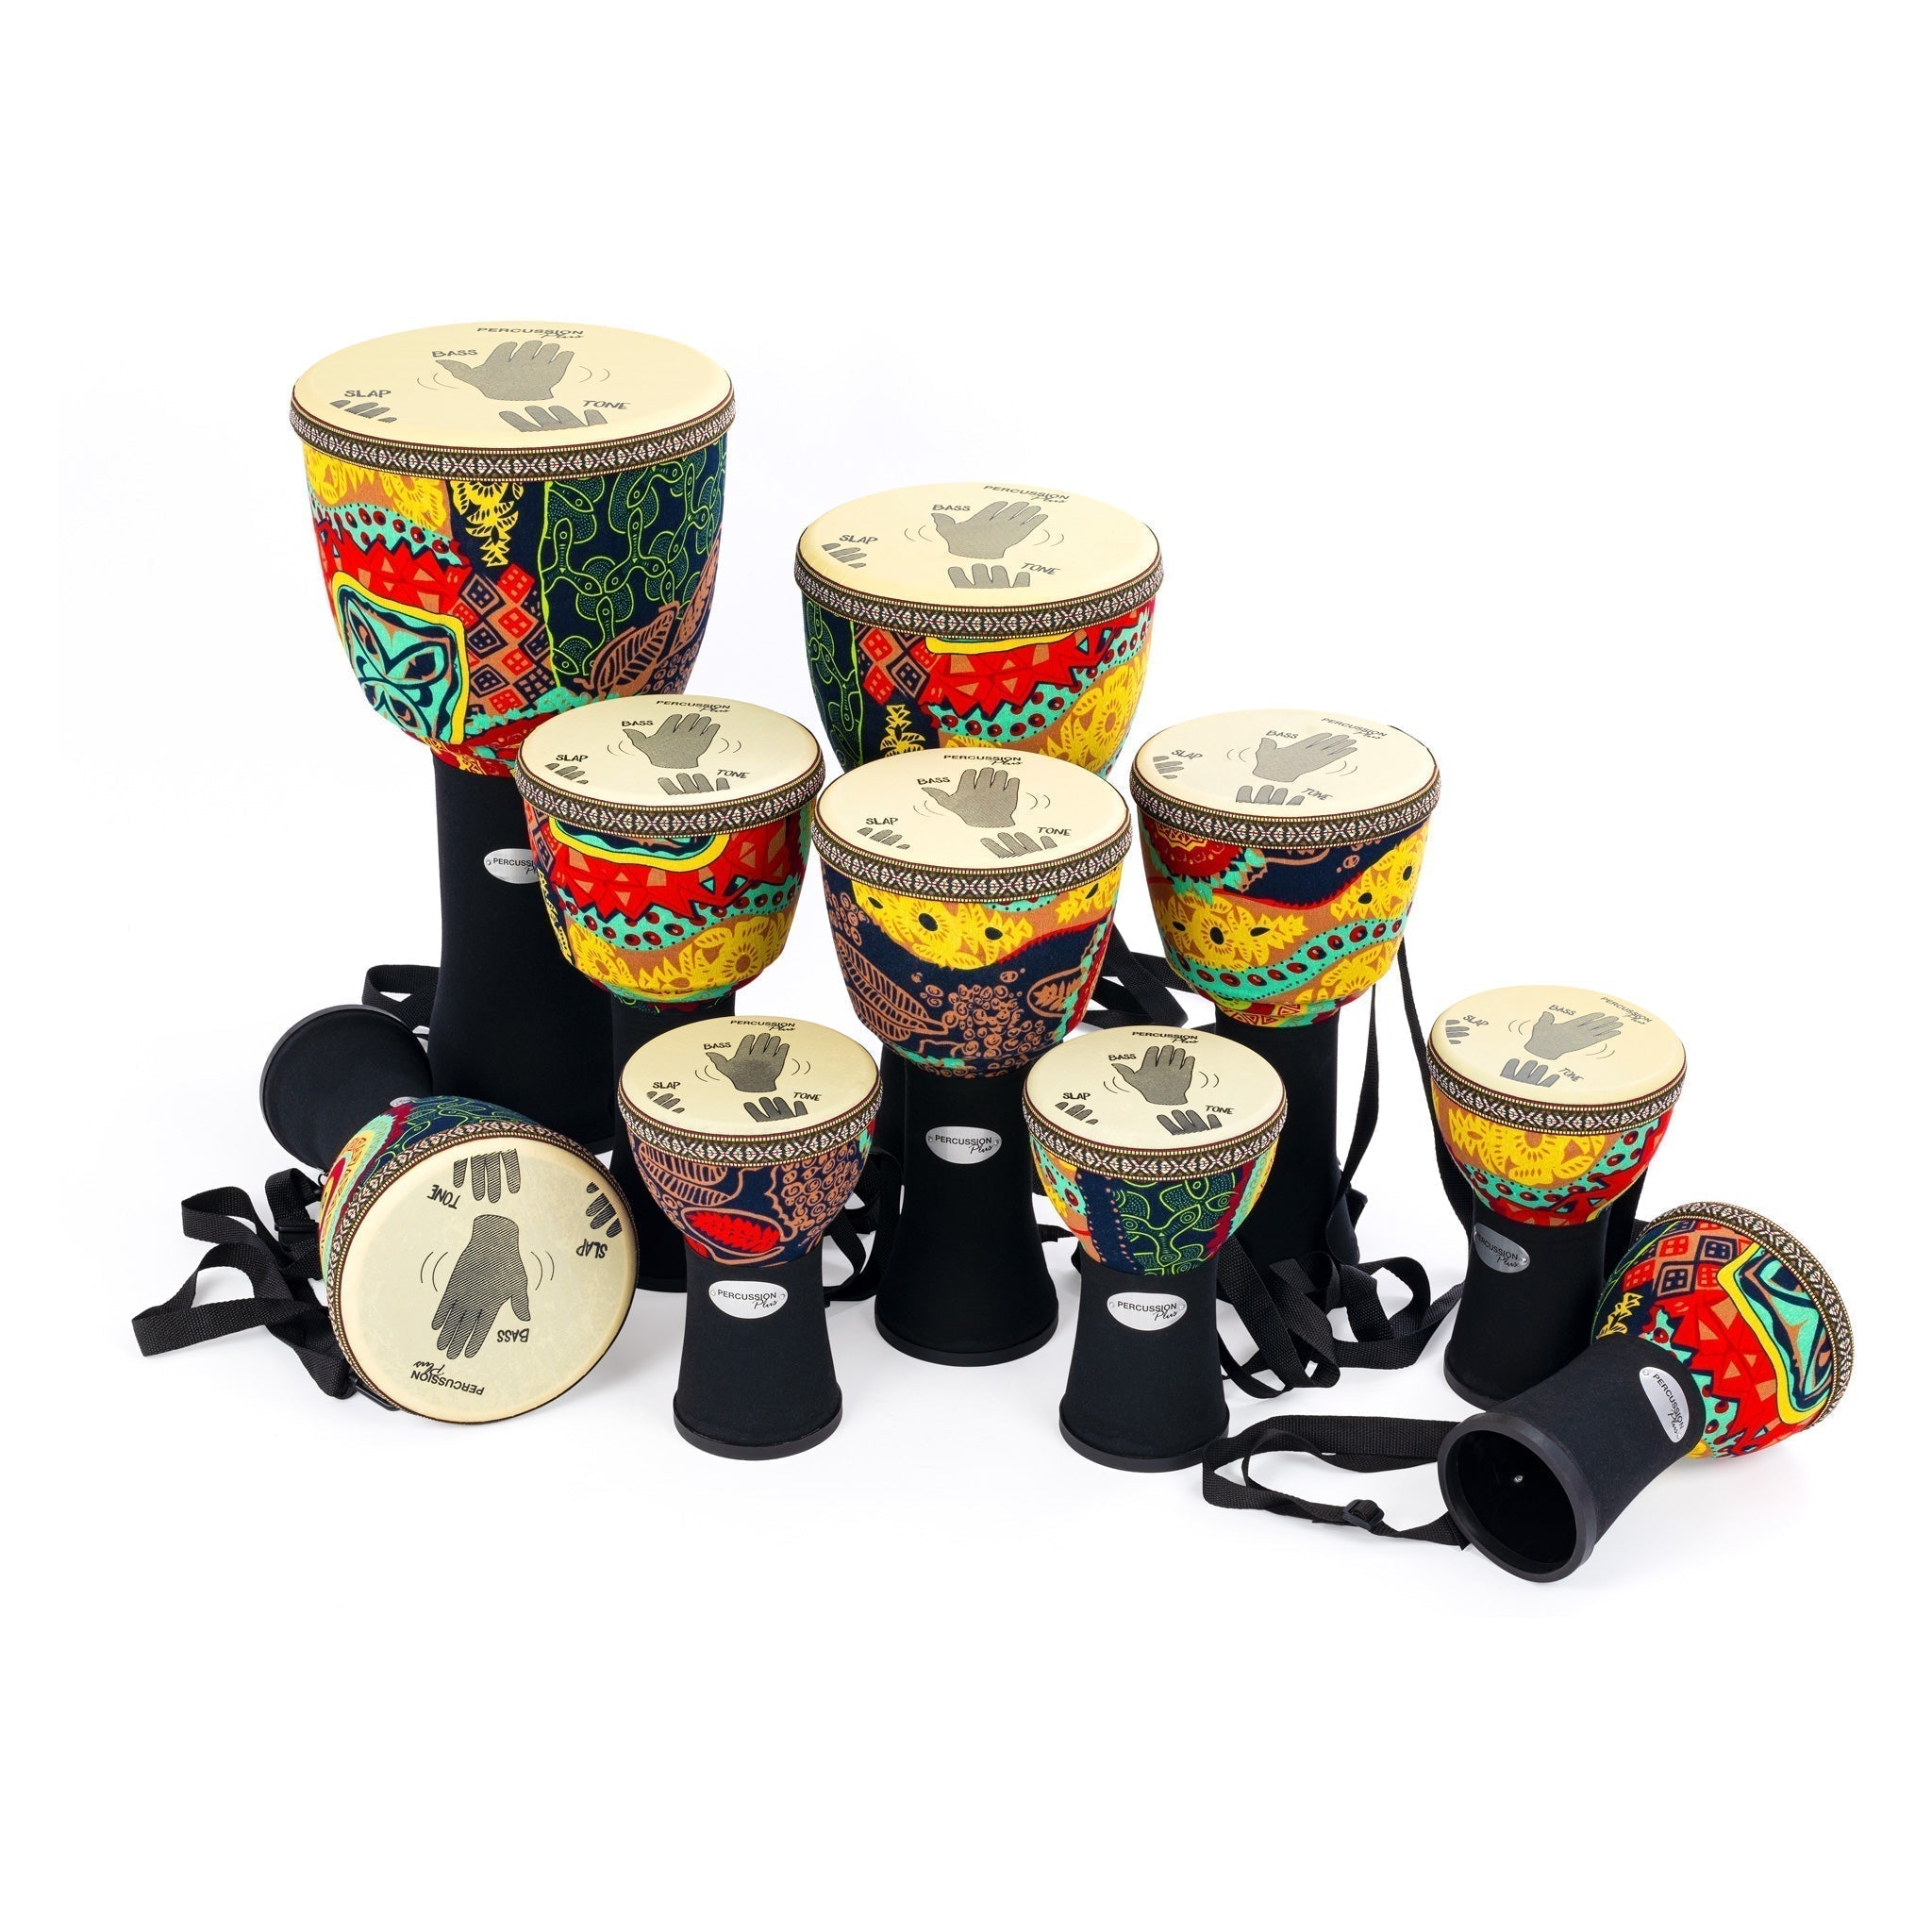 Slap djembe pack - pretuned, Djembes are becoming ever popular with classes starting up in schools, music hubs, and your local community centre. Nothing matches the joy of making music together and these classes are not only great as music education for youngsters, but also as a fun and therapeutic activity for all ages Slap Djembes come with a wealth of features making them easy to play, transport, and most importantly giving them a great sound. A great design, well-tuned drum head and durable construction